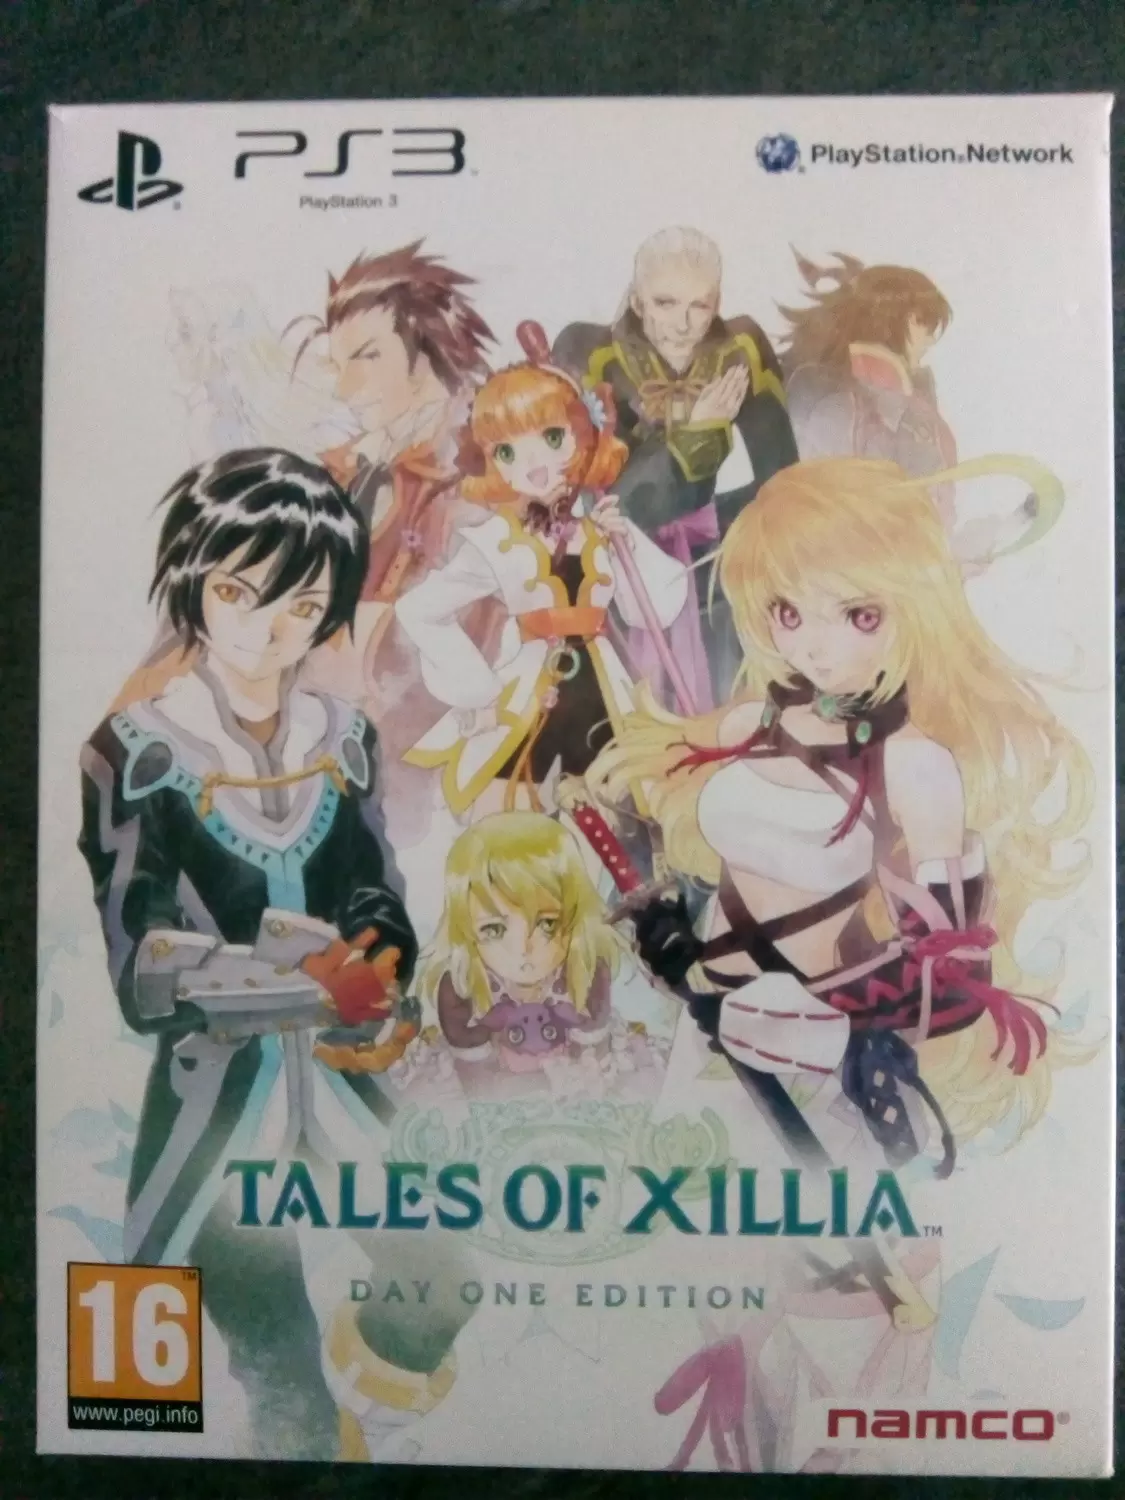 PS3 Games - Tales of Xillia Edition Day One